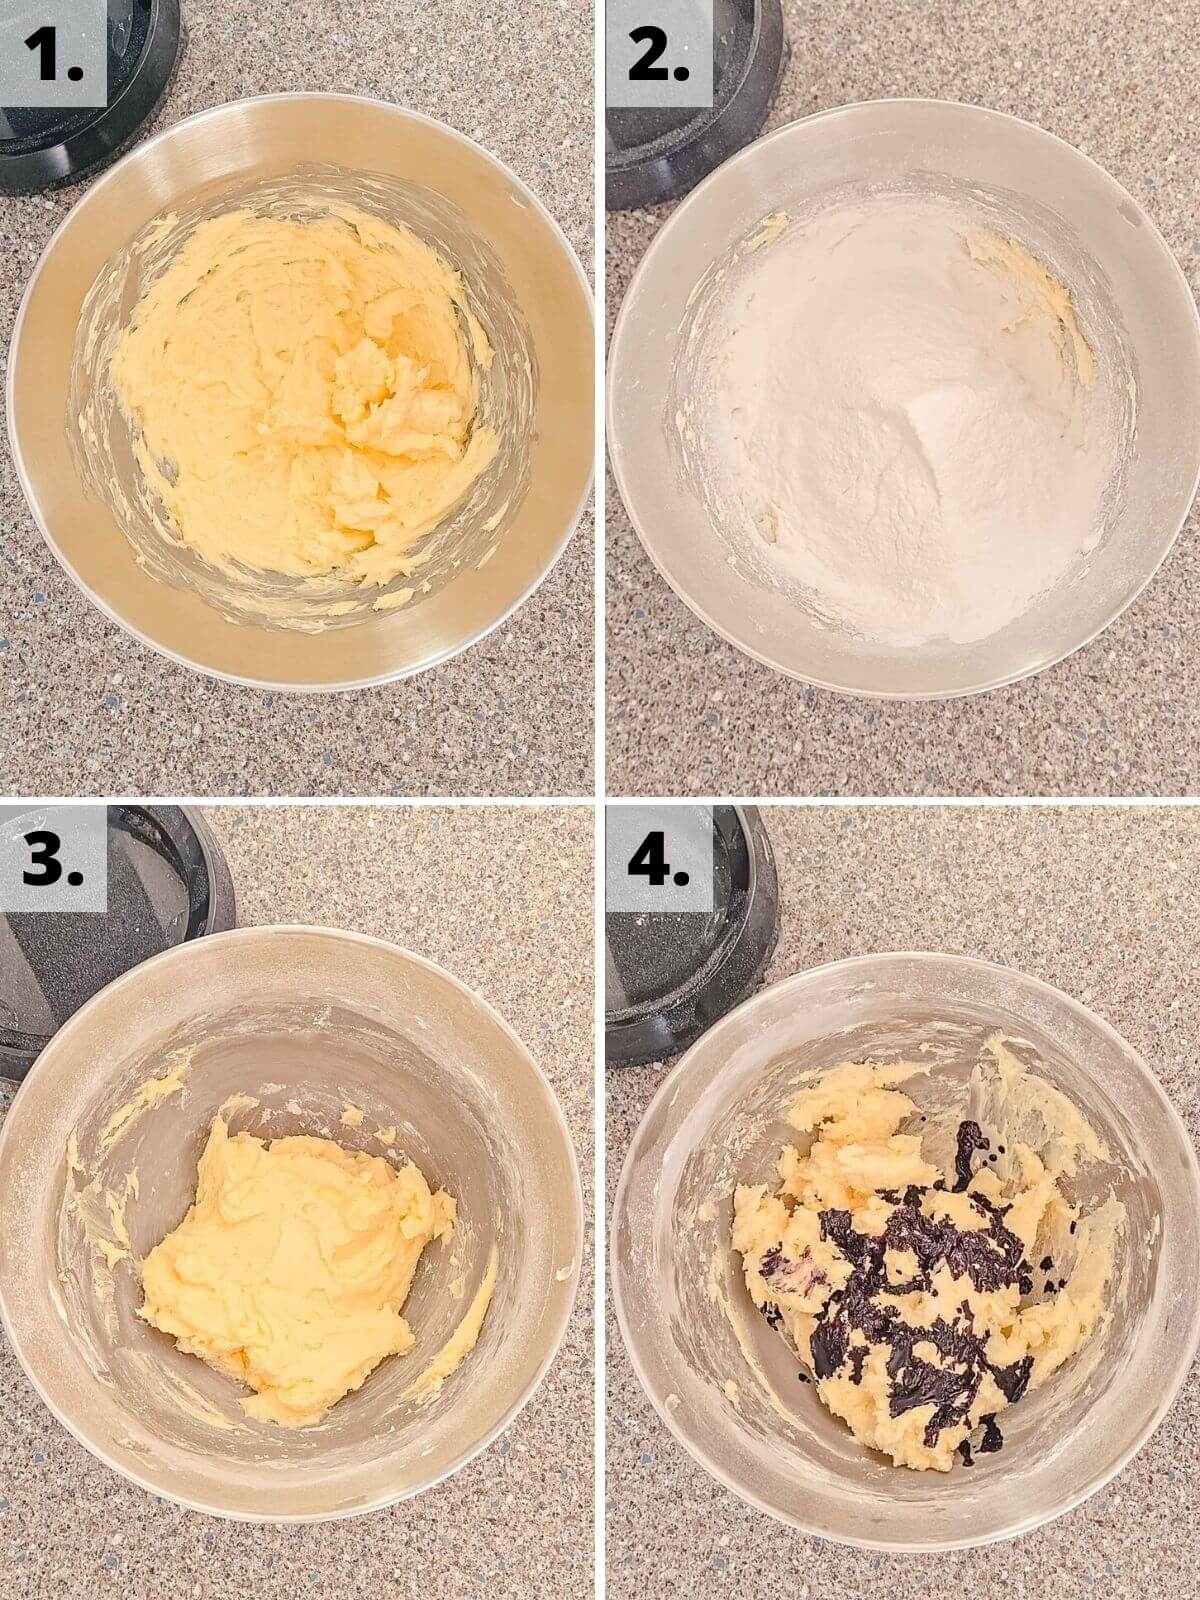 how to make purple yam ube buttercream frosting recipe method steps 1 to 4.